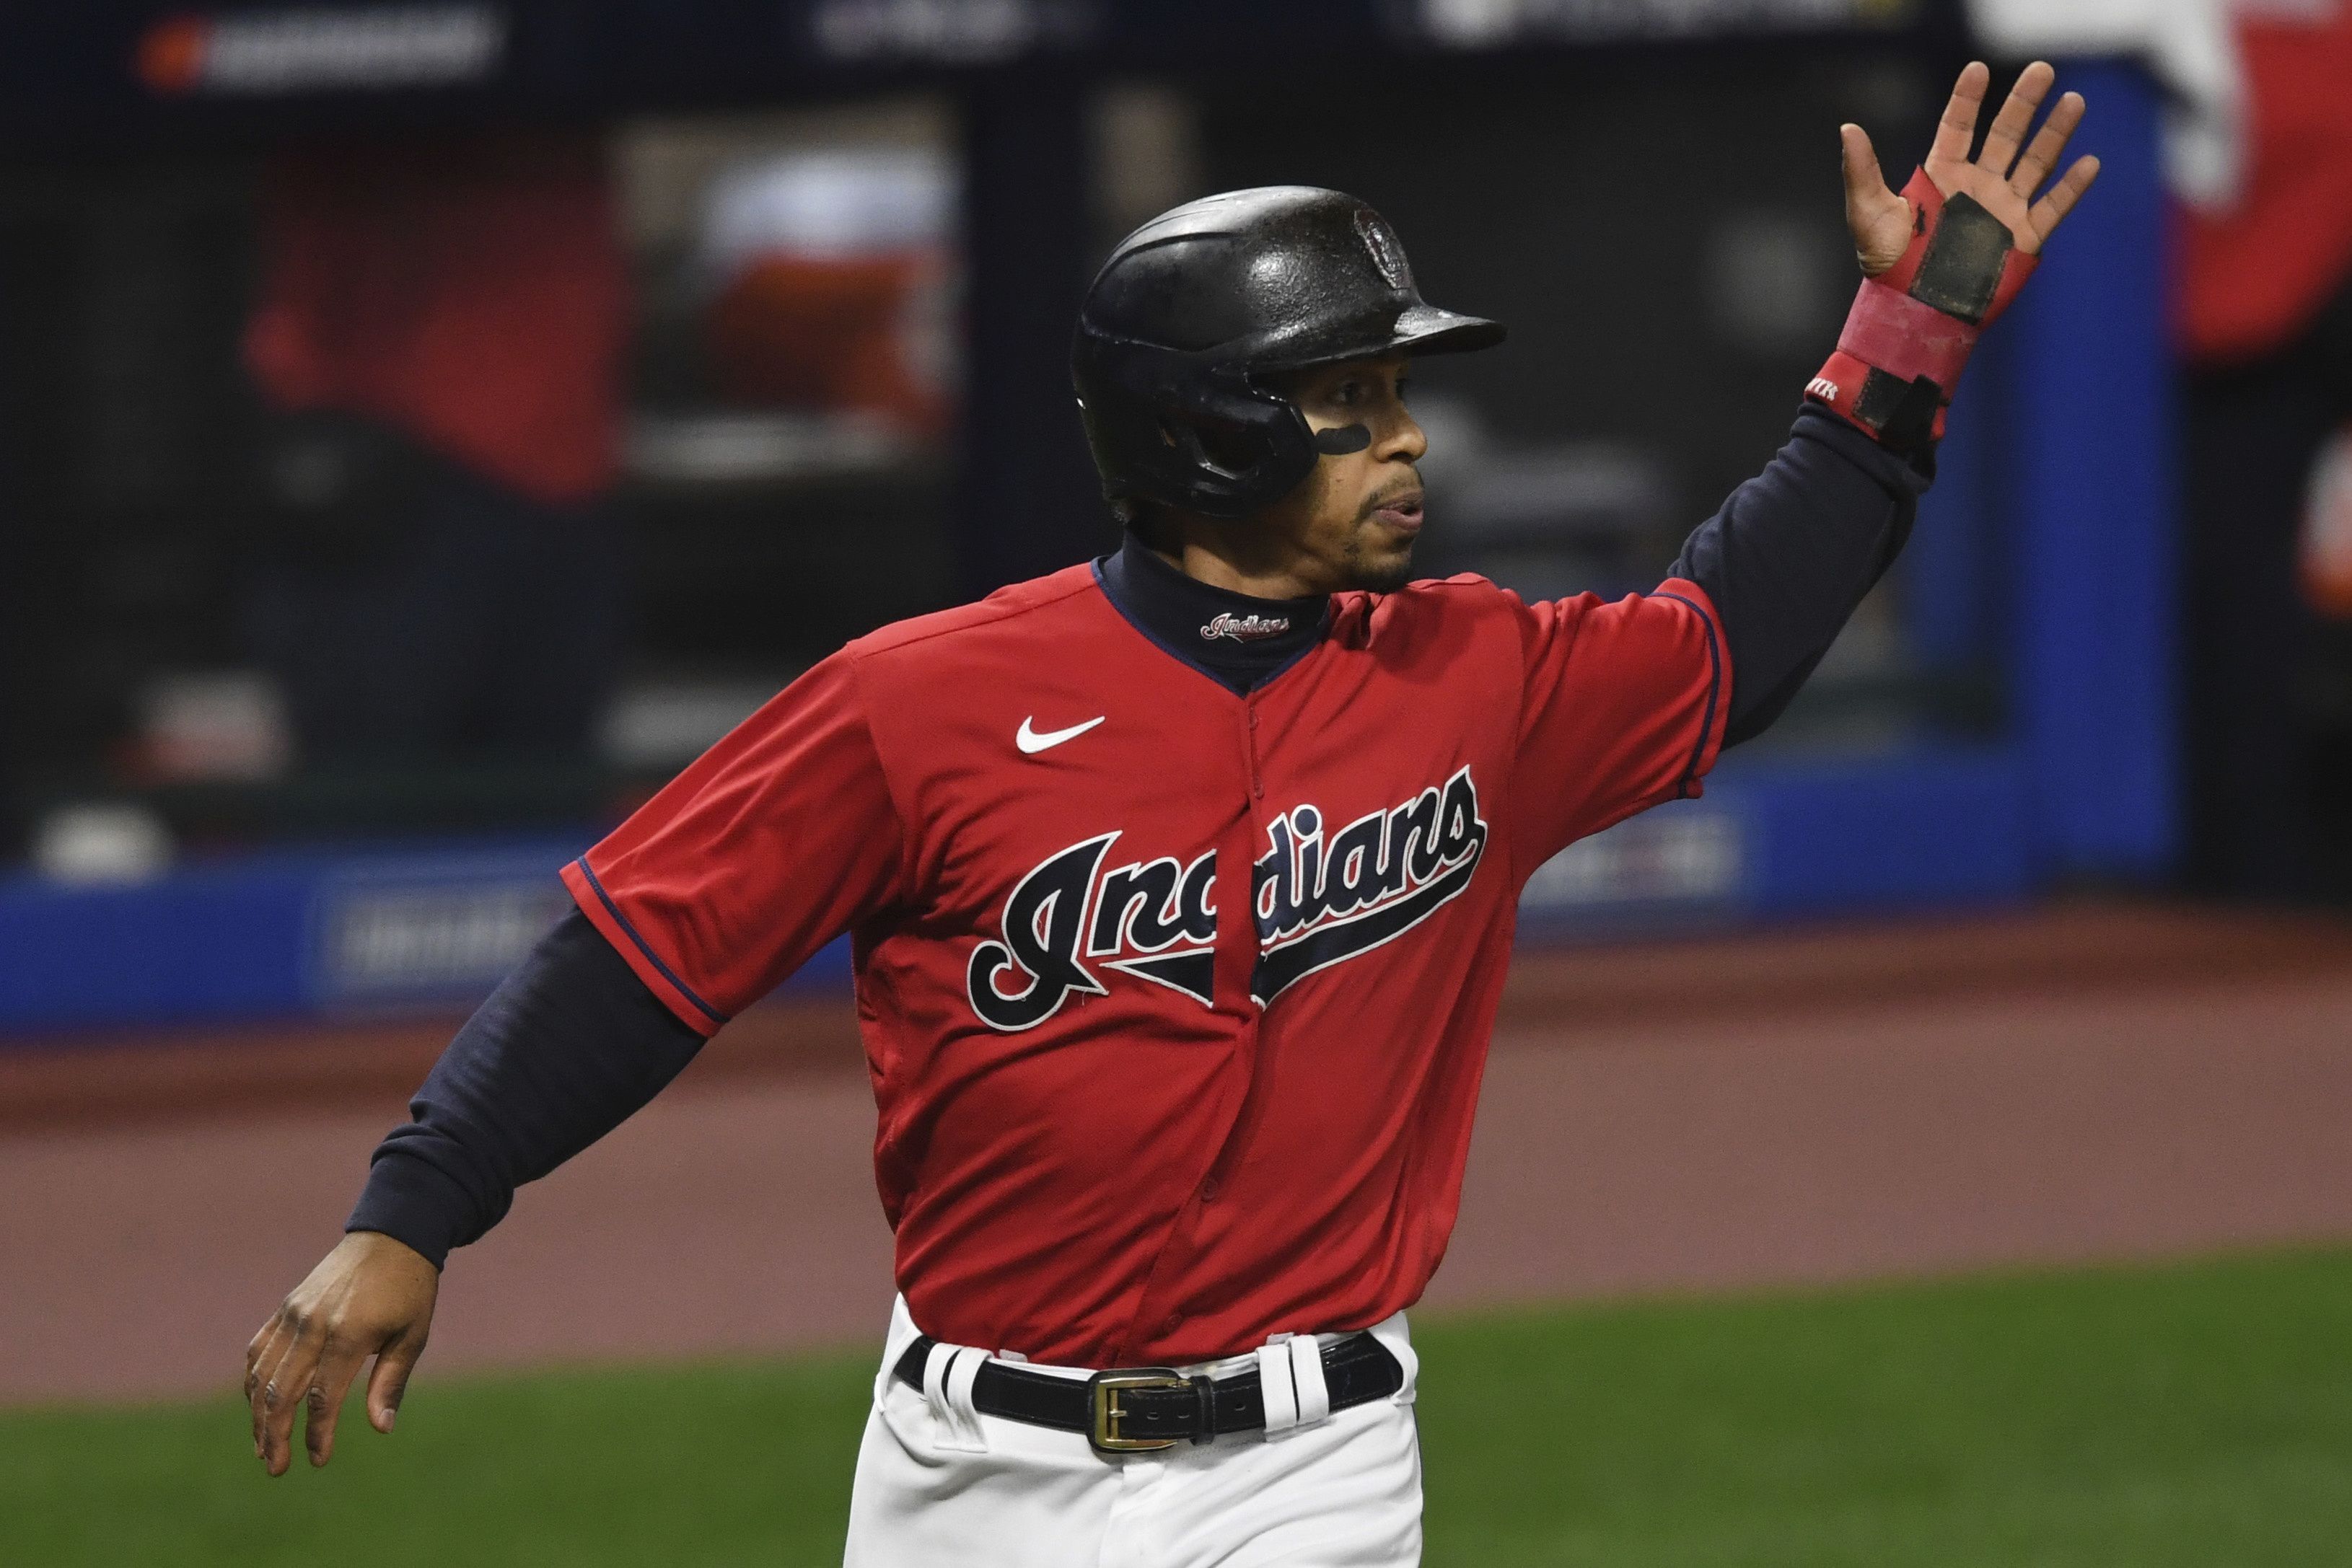 Indians add two more All Stars: Lindor and Hand joining Santana on